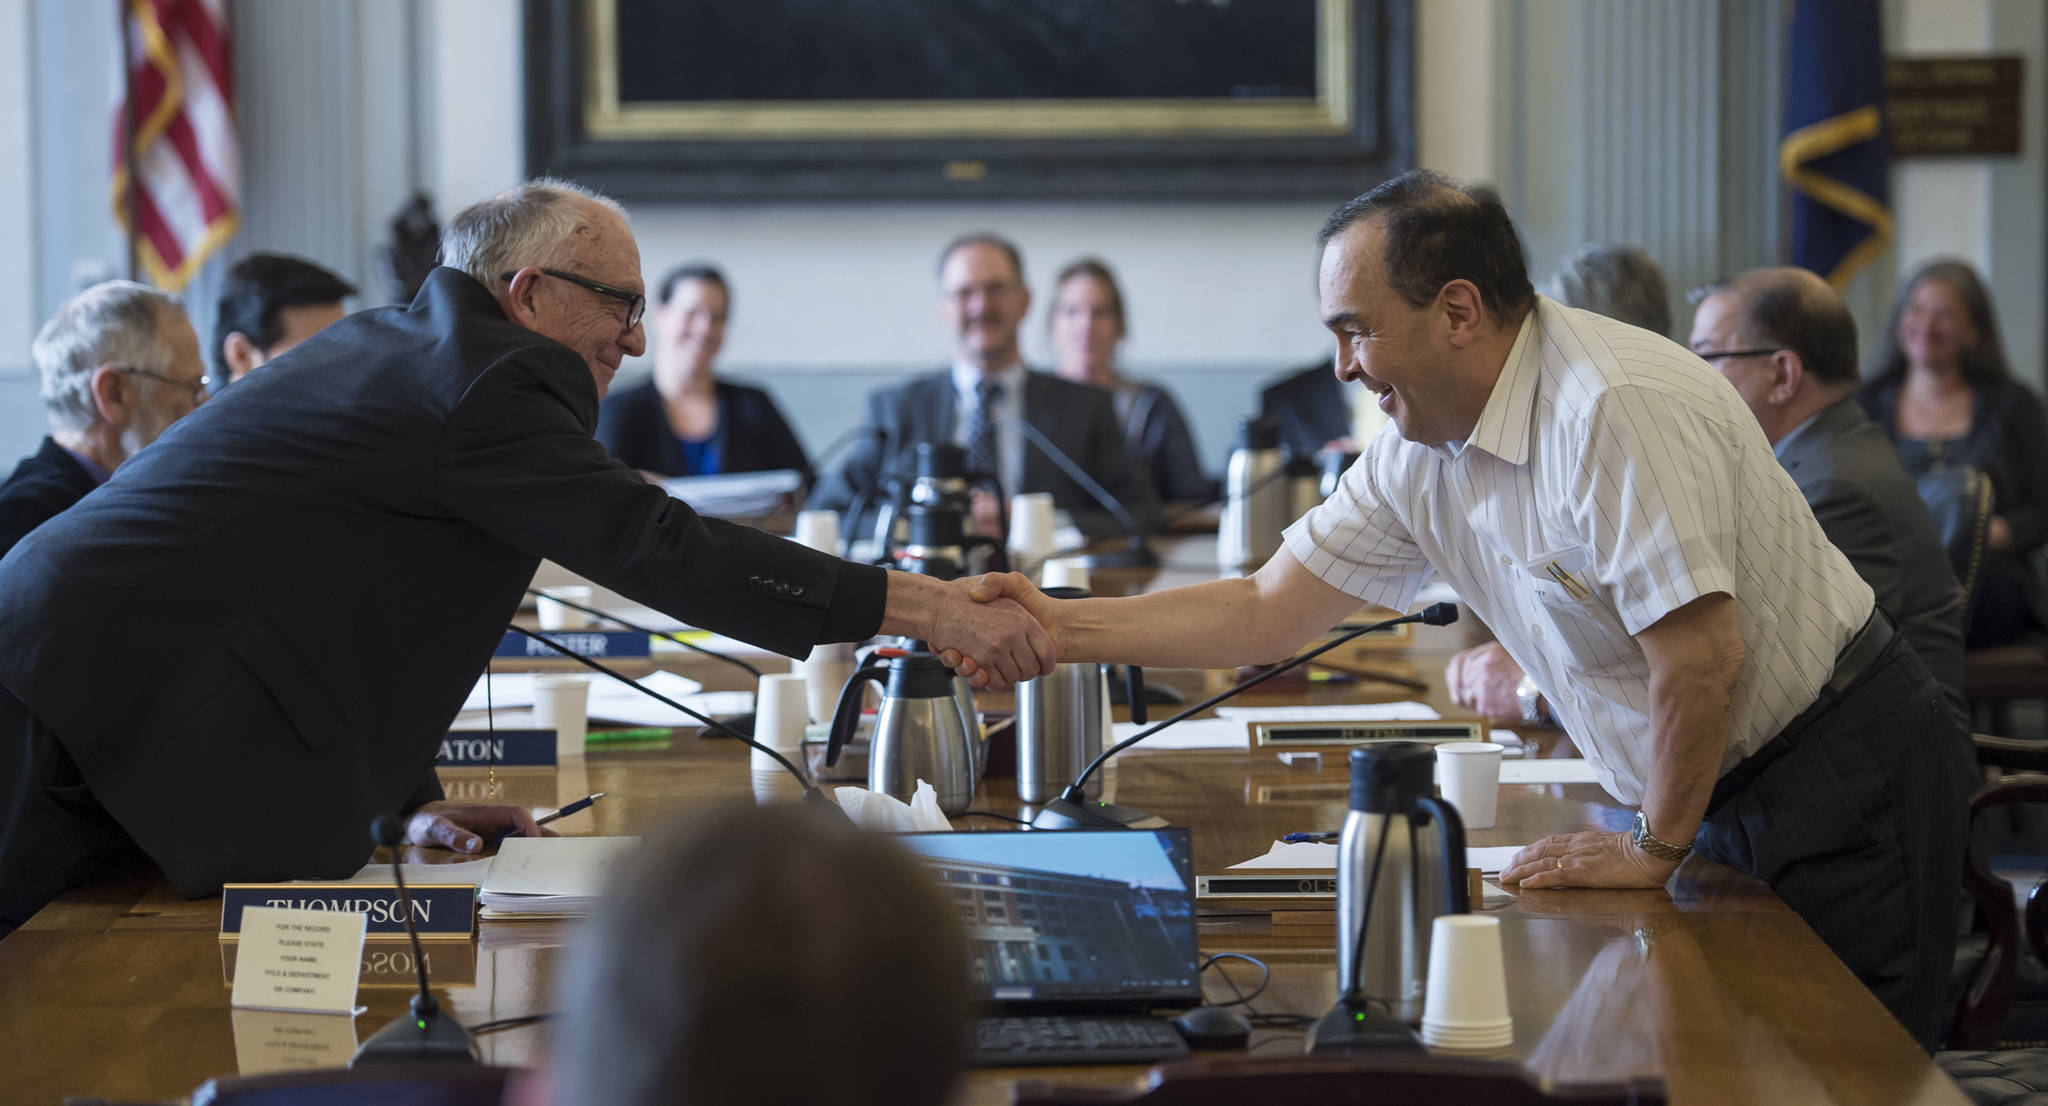 Conference Committee members Rep. Steve Thompson, R-Fairbanks, left, shakes hands with Sen. Donald Olson, R-Golovin, after the committee finished its work on the budgets at the Capitol on Thursday, May 10, 2018. (Michael Penn | Juneau Empire)